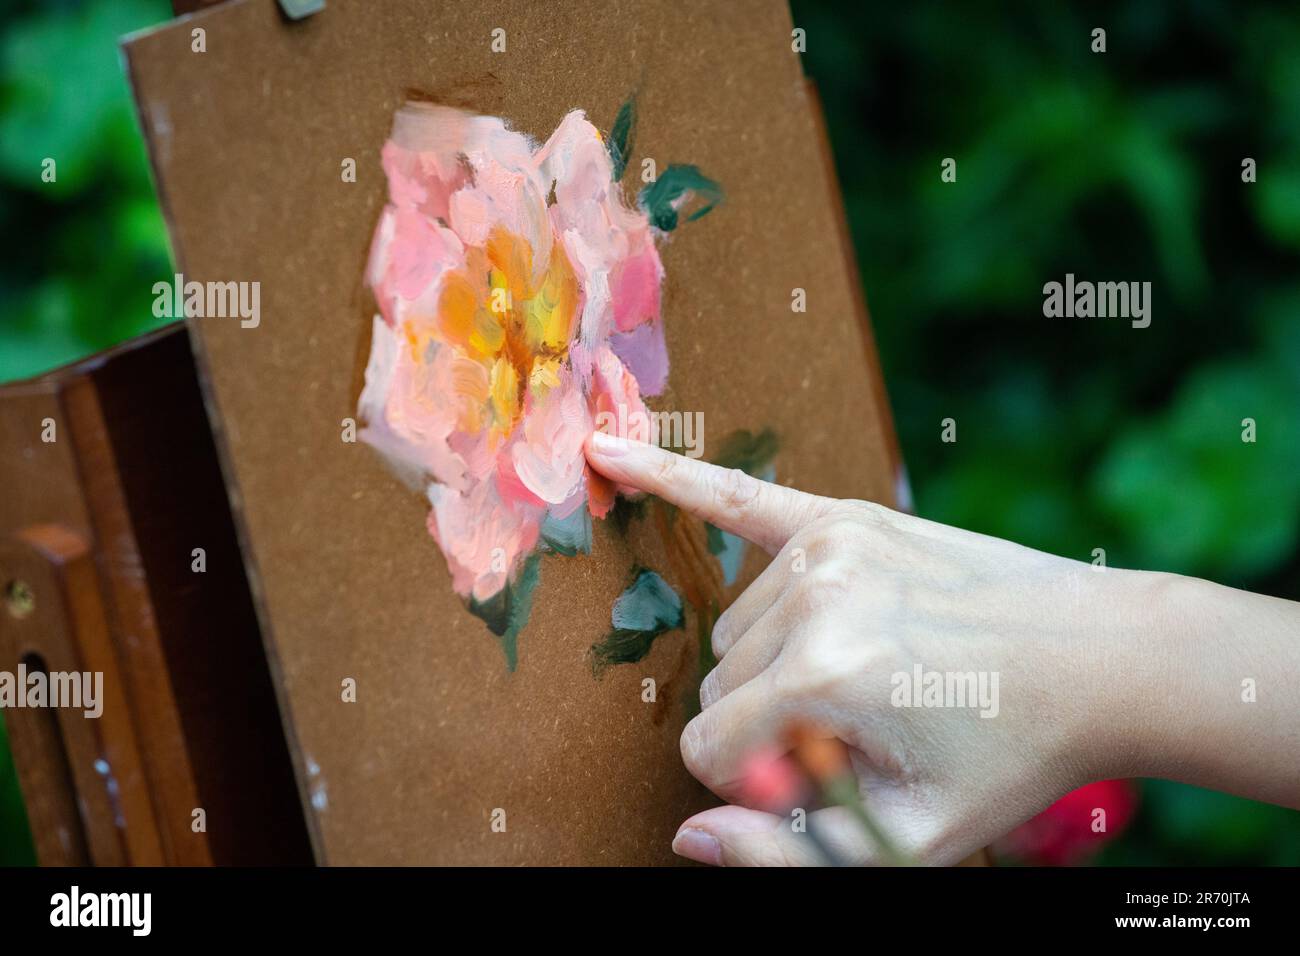 Young fingers artist at drawing easel Stock Photo by ©anrymoscow 96379940